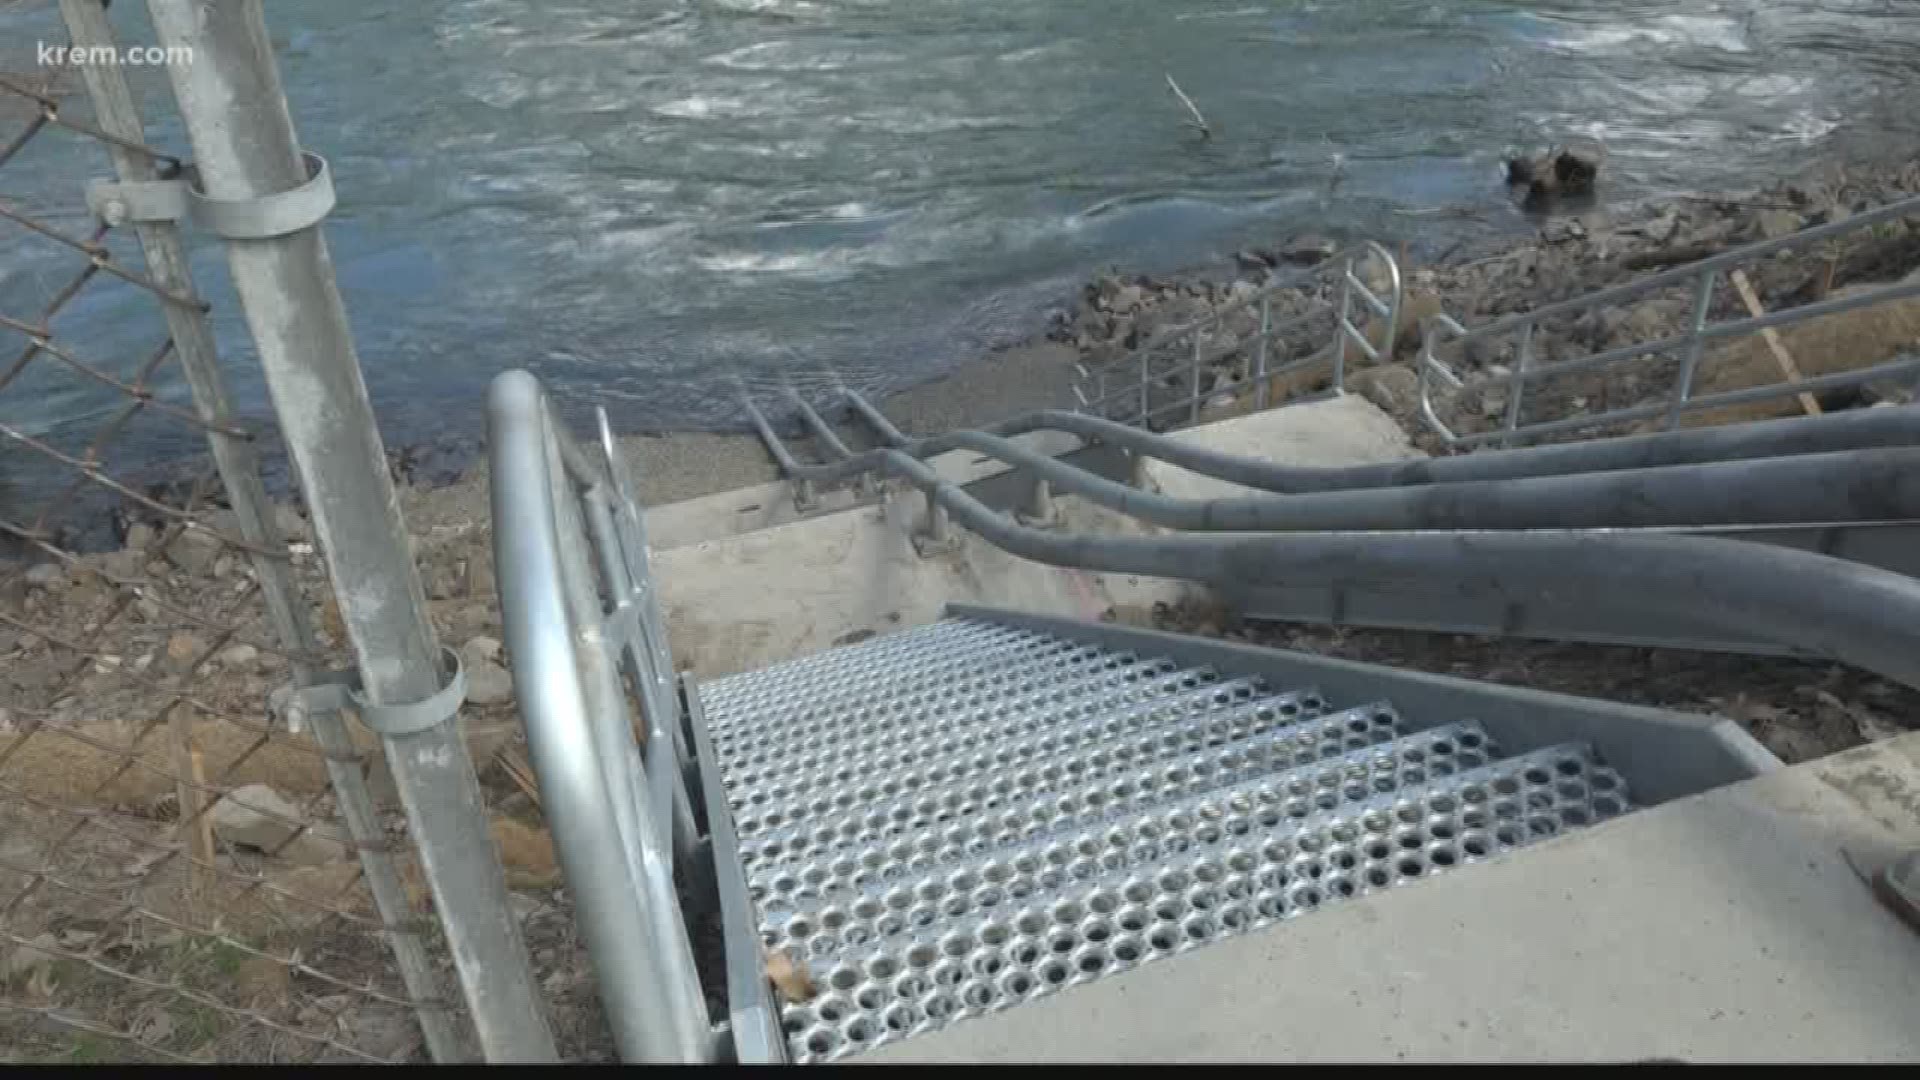 KREM Reporter Amanda Roley visited a new boat launch meant for rafts and kayaks in Glover Park in Spokane.